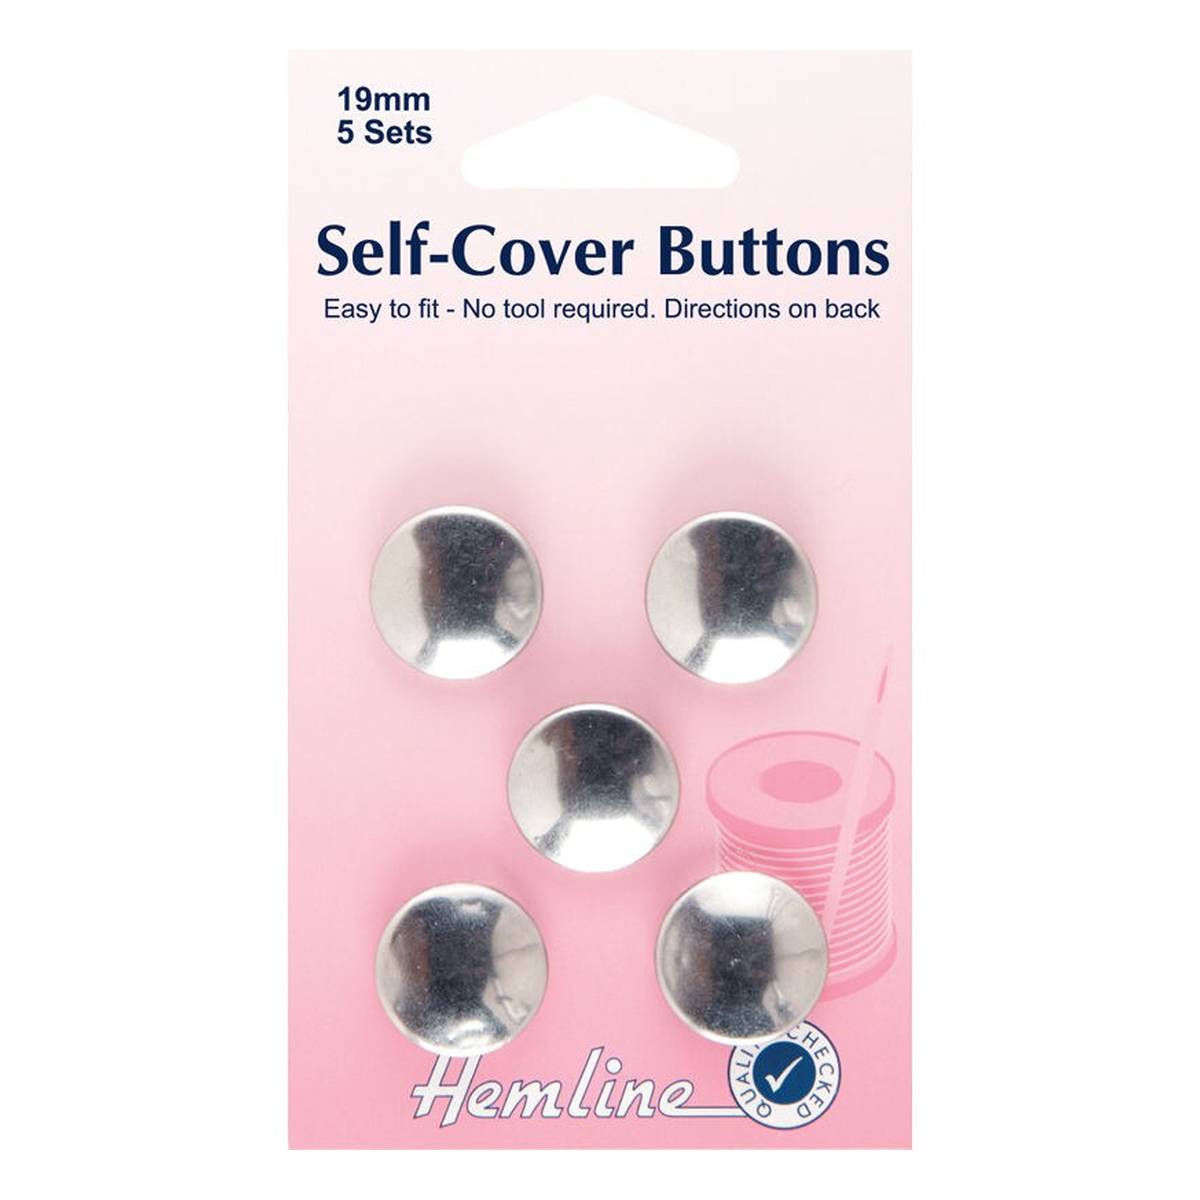 How to Use Self-Cover Buttons 